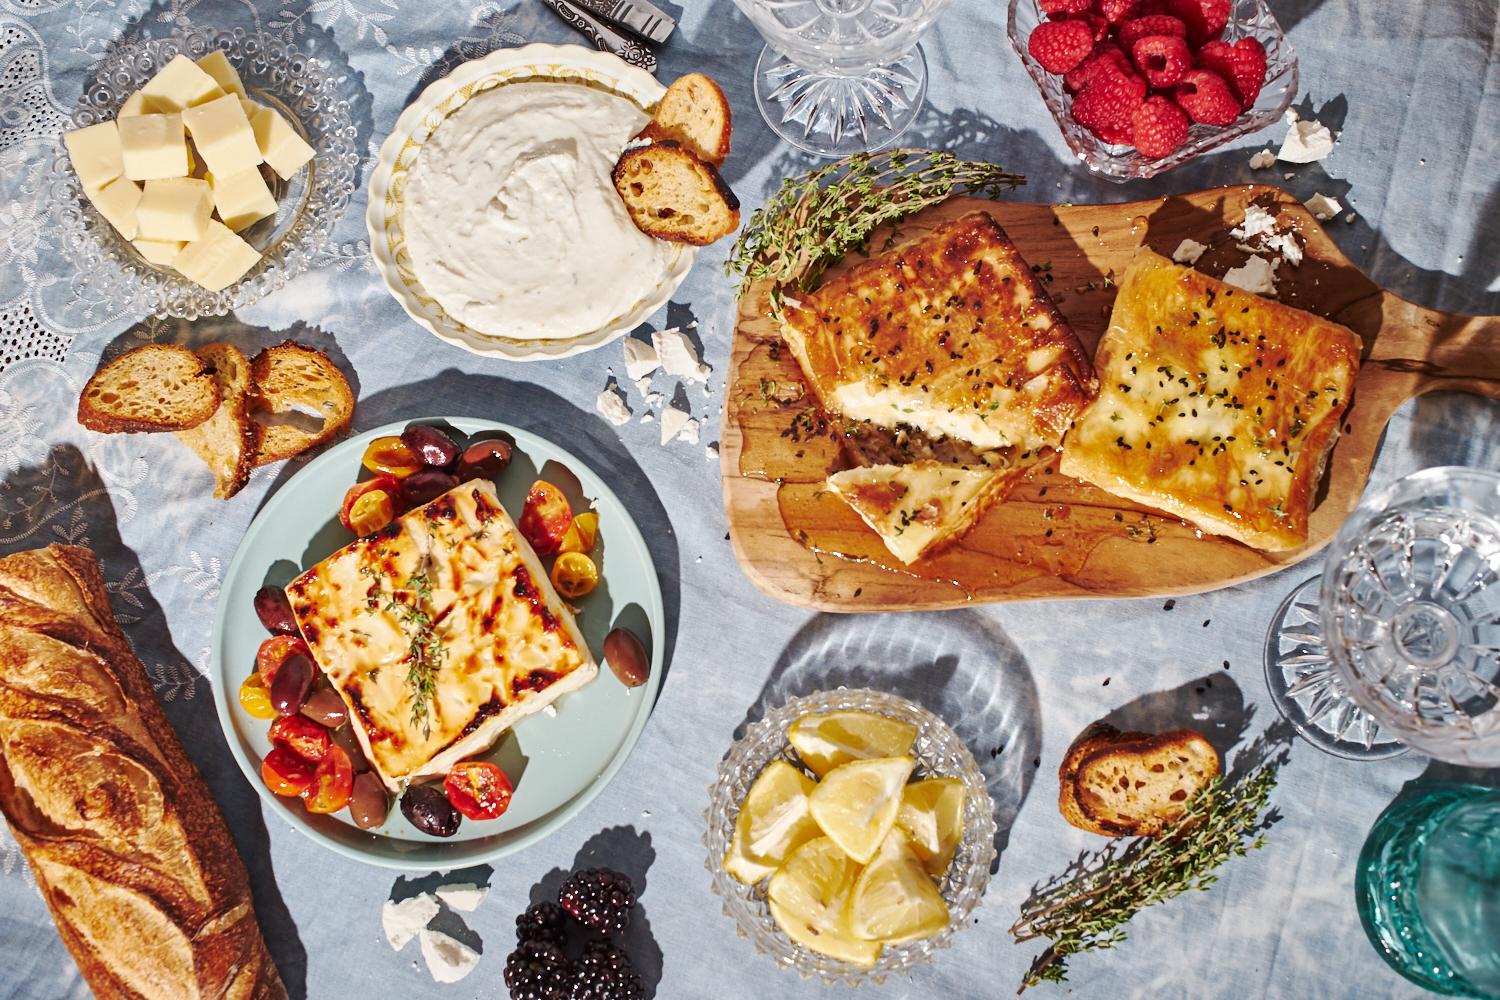 Feta three ways: baked, fried, ...lot of cheese dishes.&nbsp;